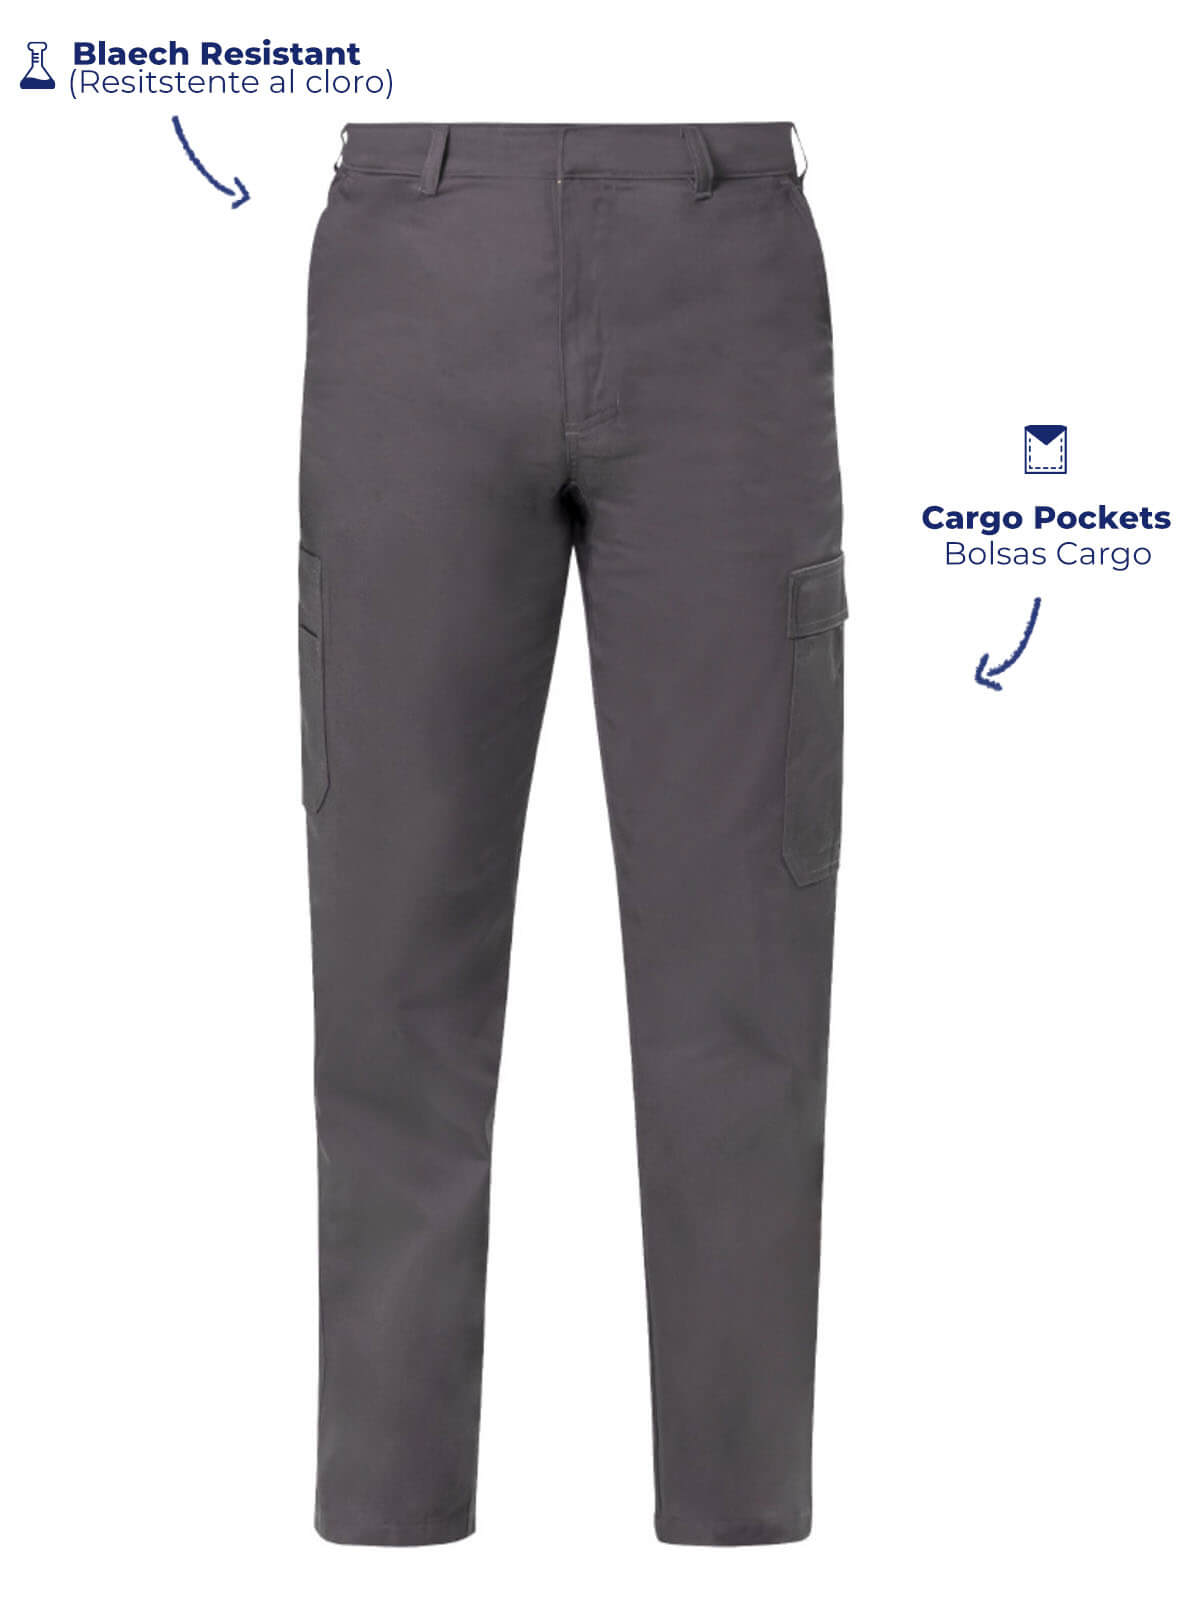 Cargo Pants gray color front view